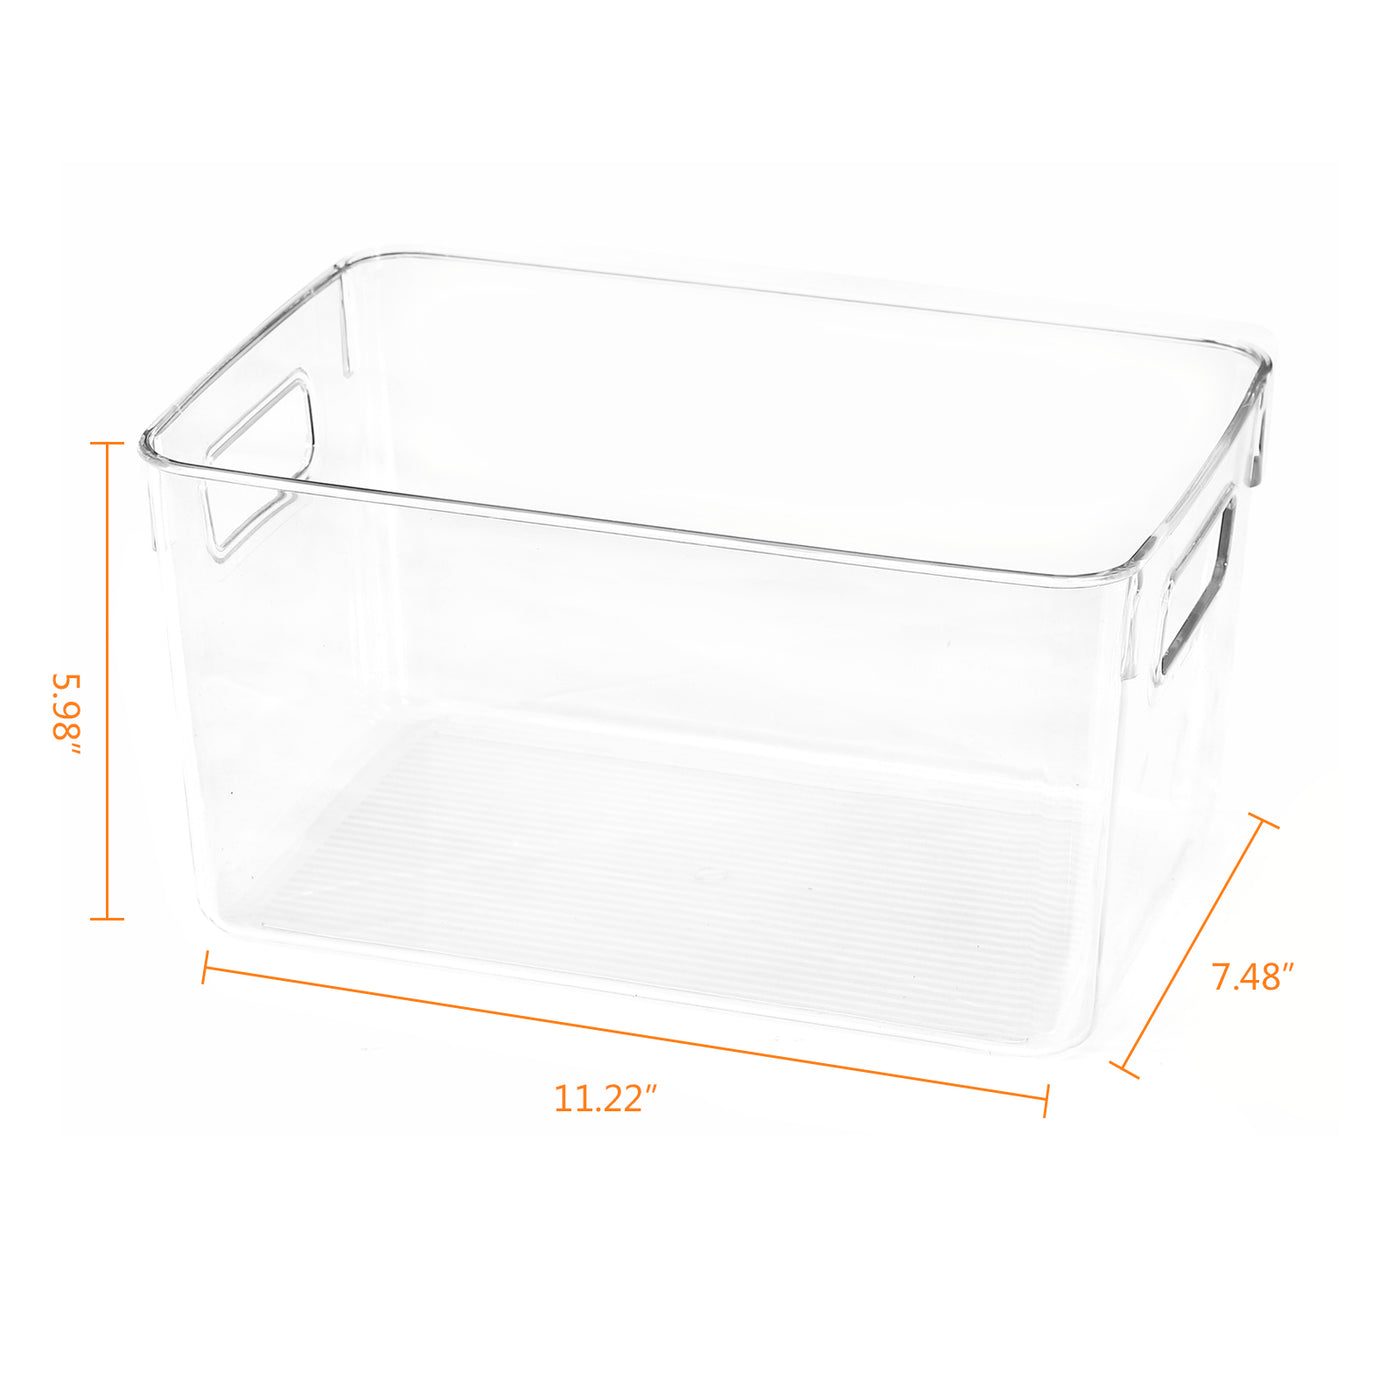 4PCS Clear Storage Containers Stackable Refrigerator Organizer Bins with Handles